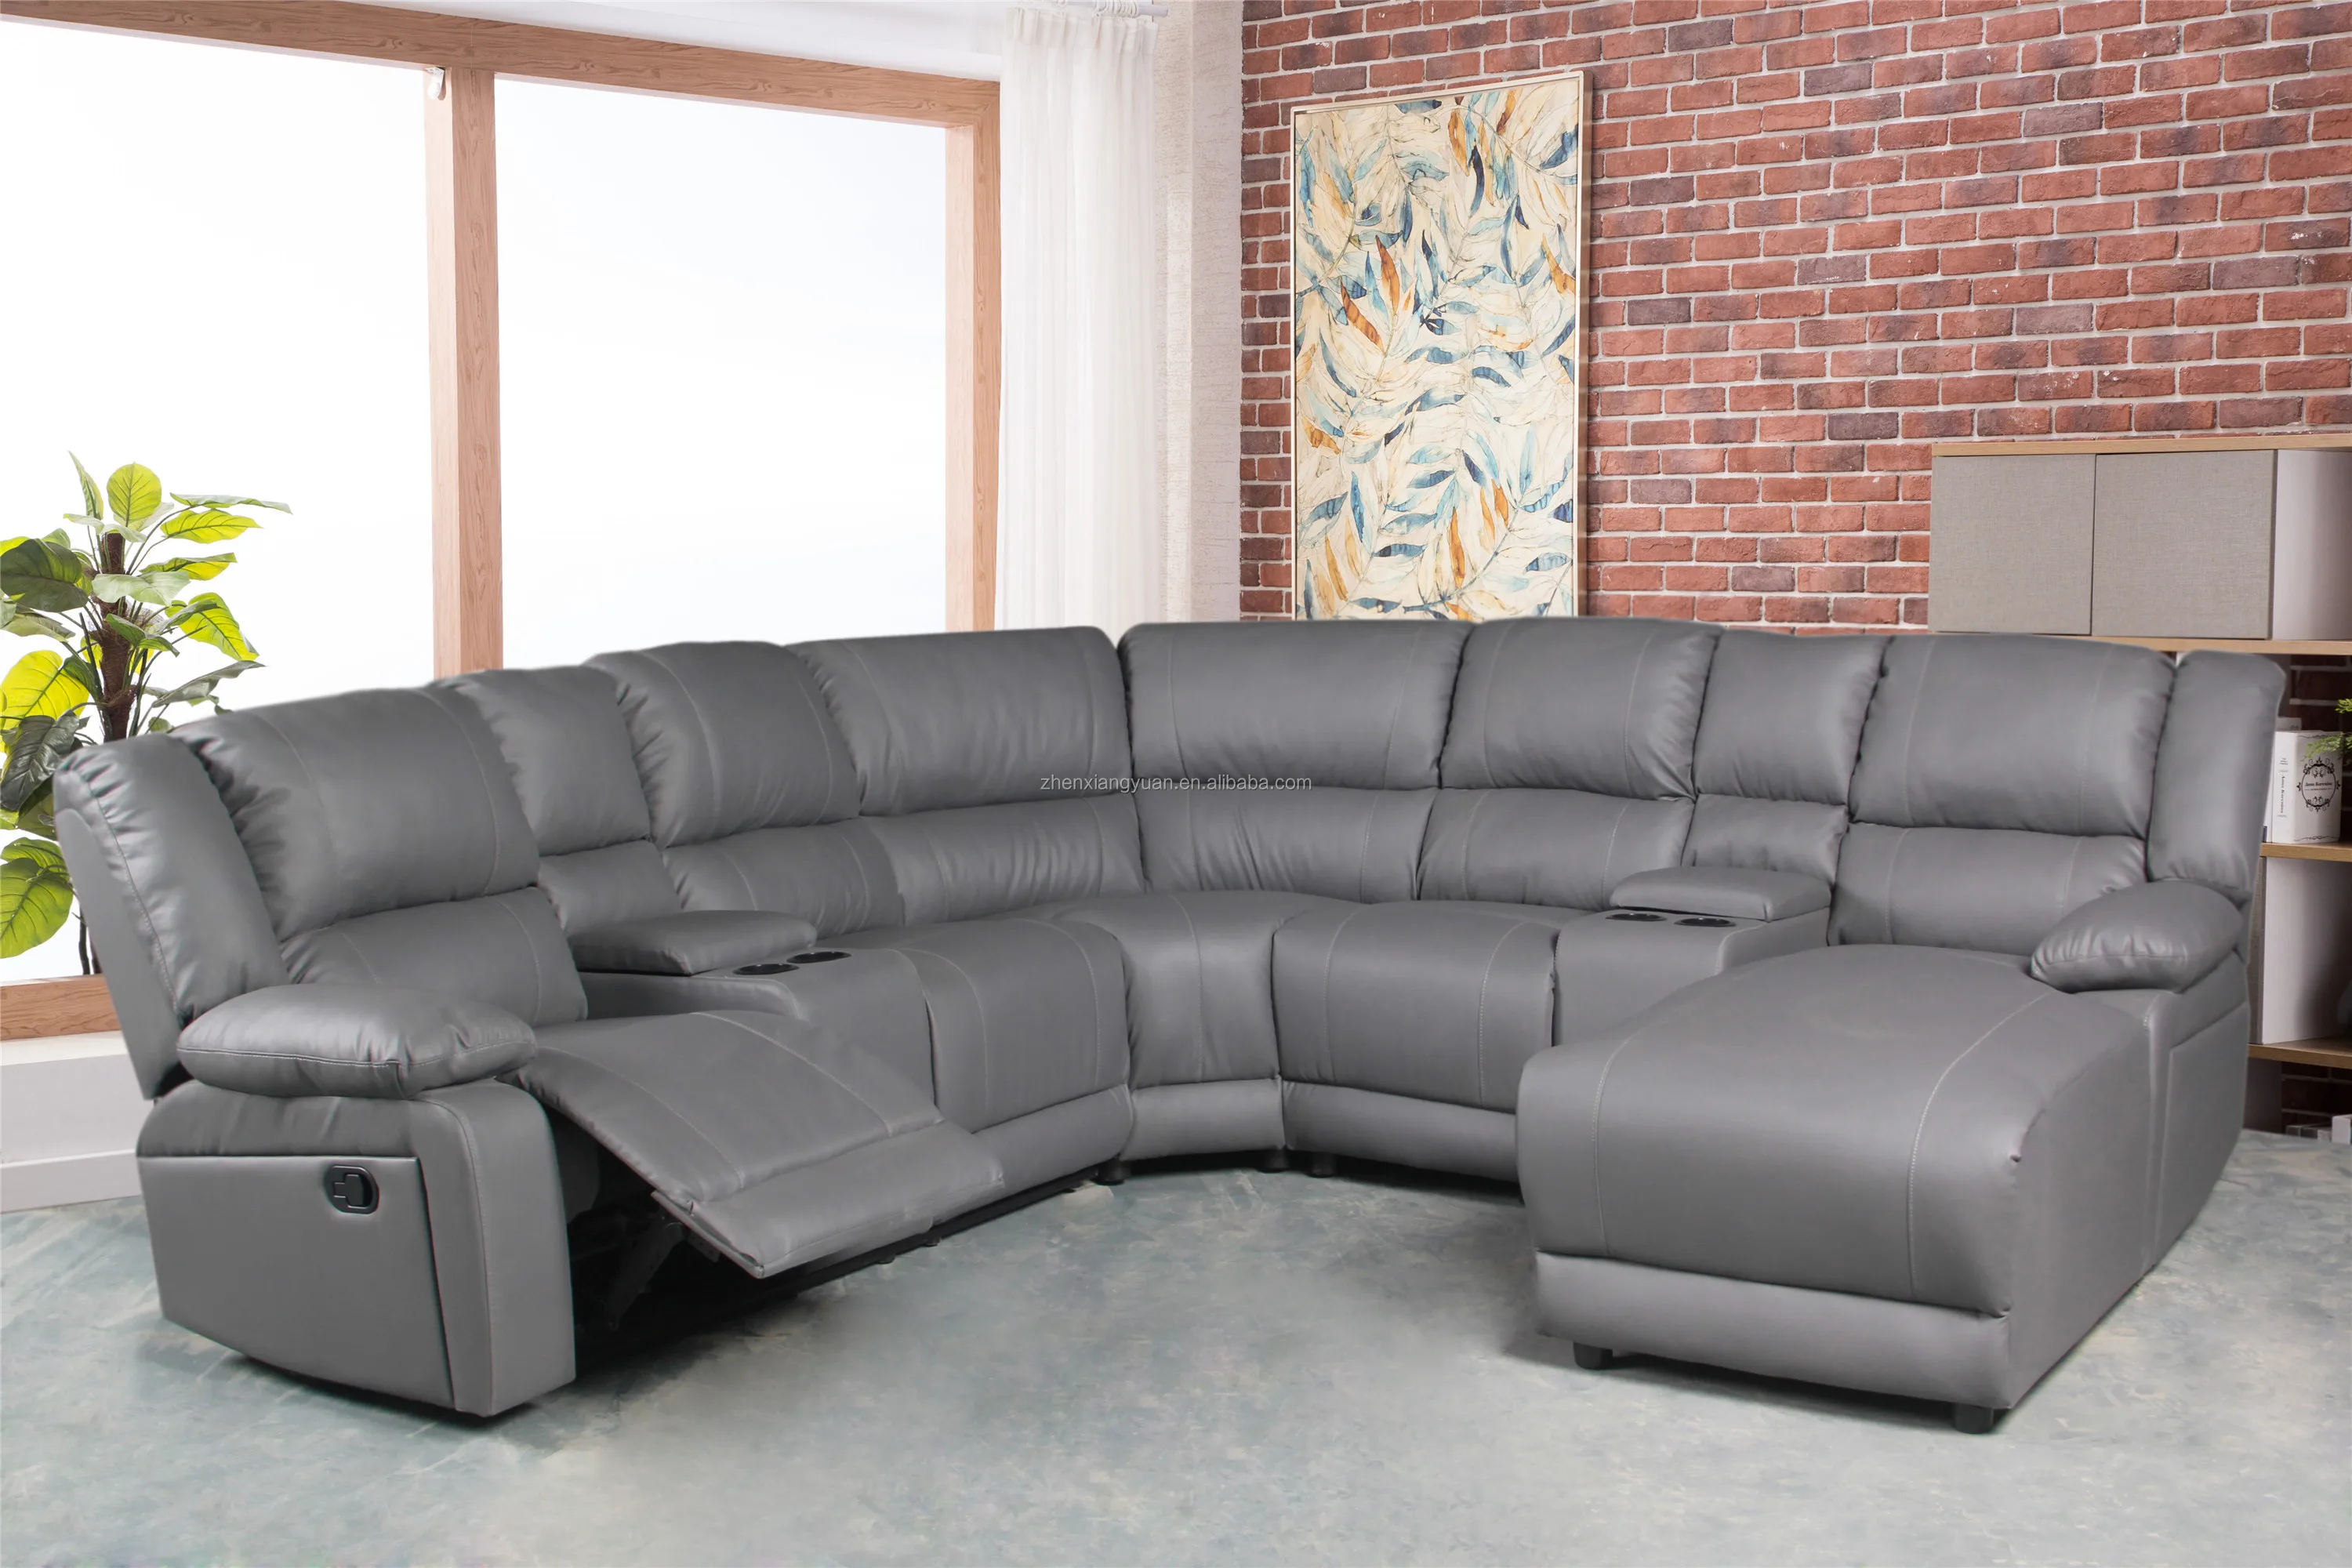 Living room furniture grey air leather recliner sectional sofa couch with chaise